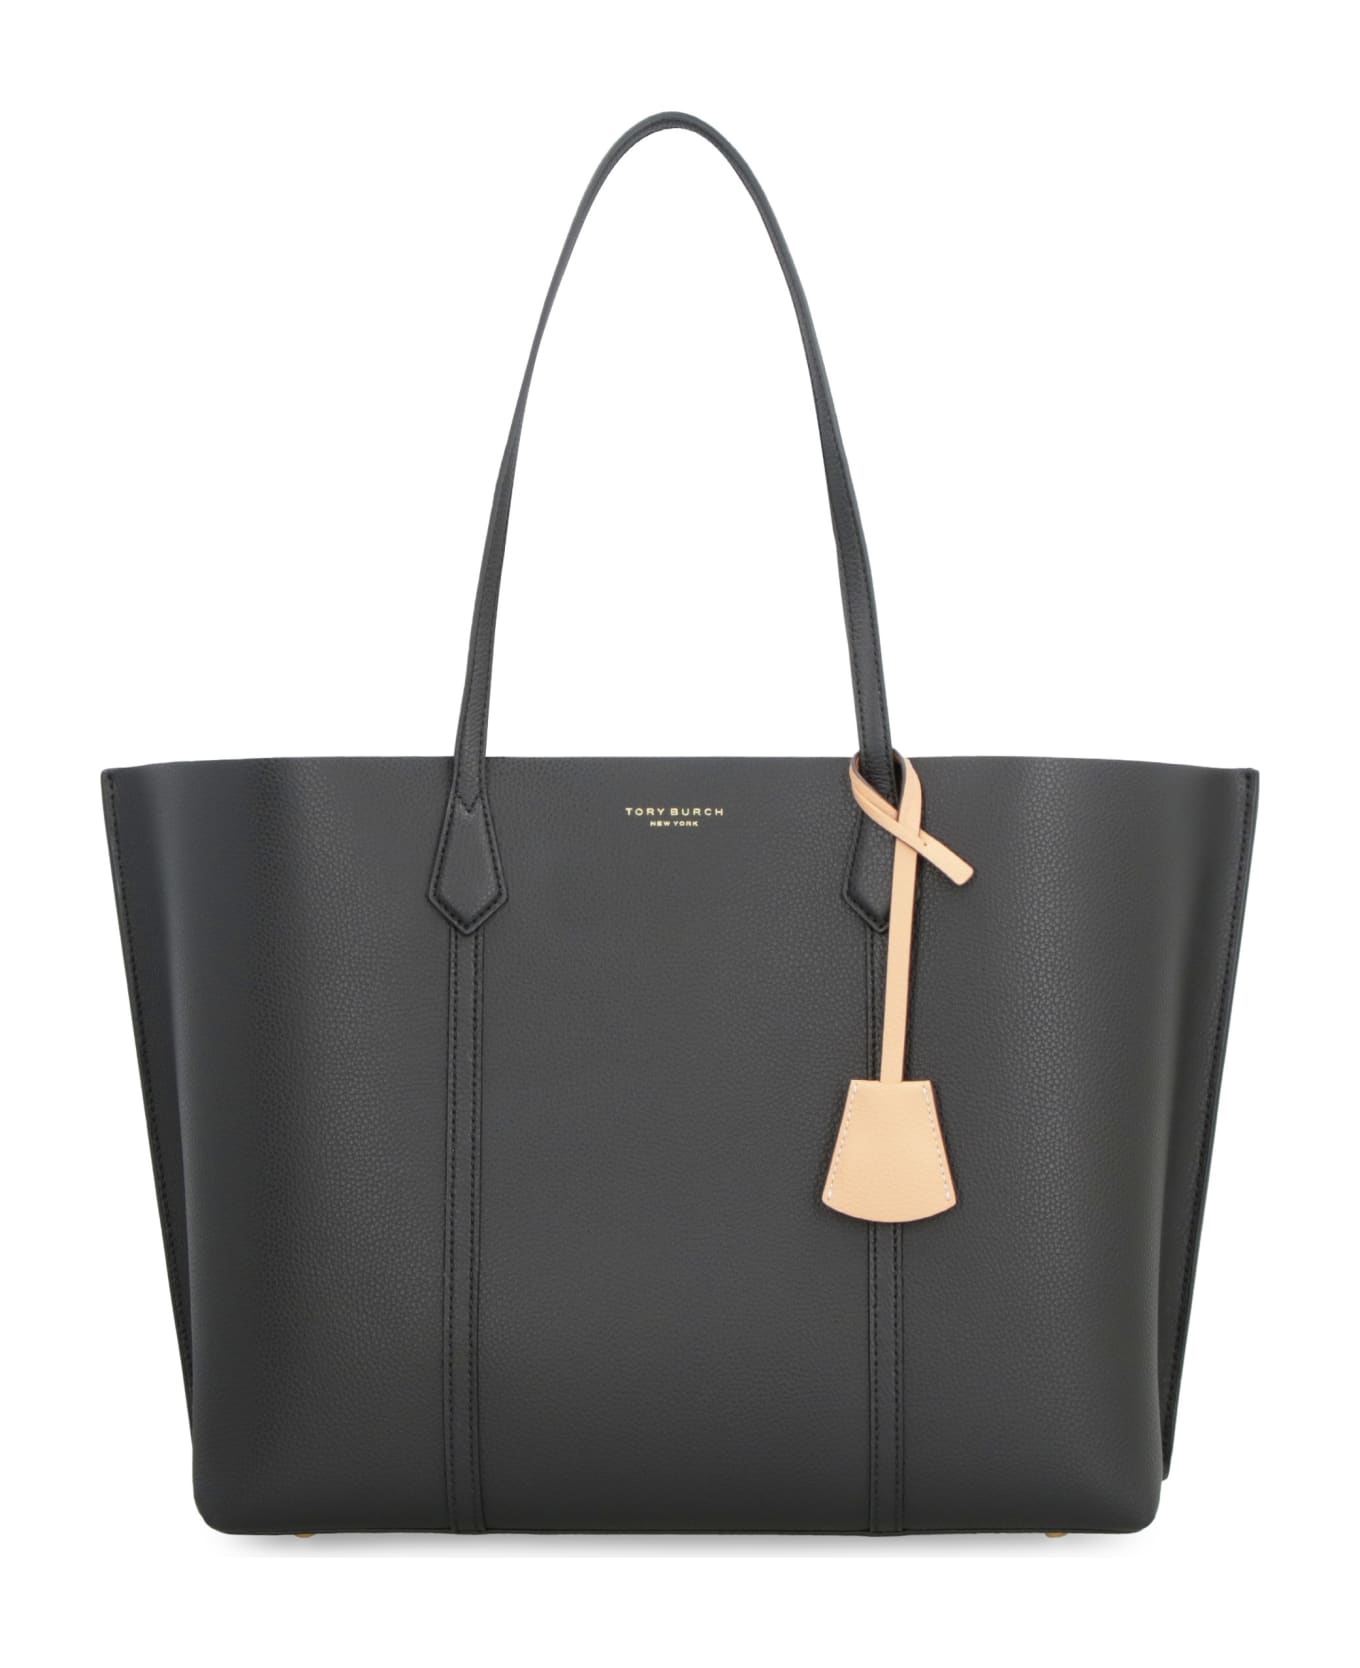 Tory Burch Perry Smooth Leather Tote Bag - black